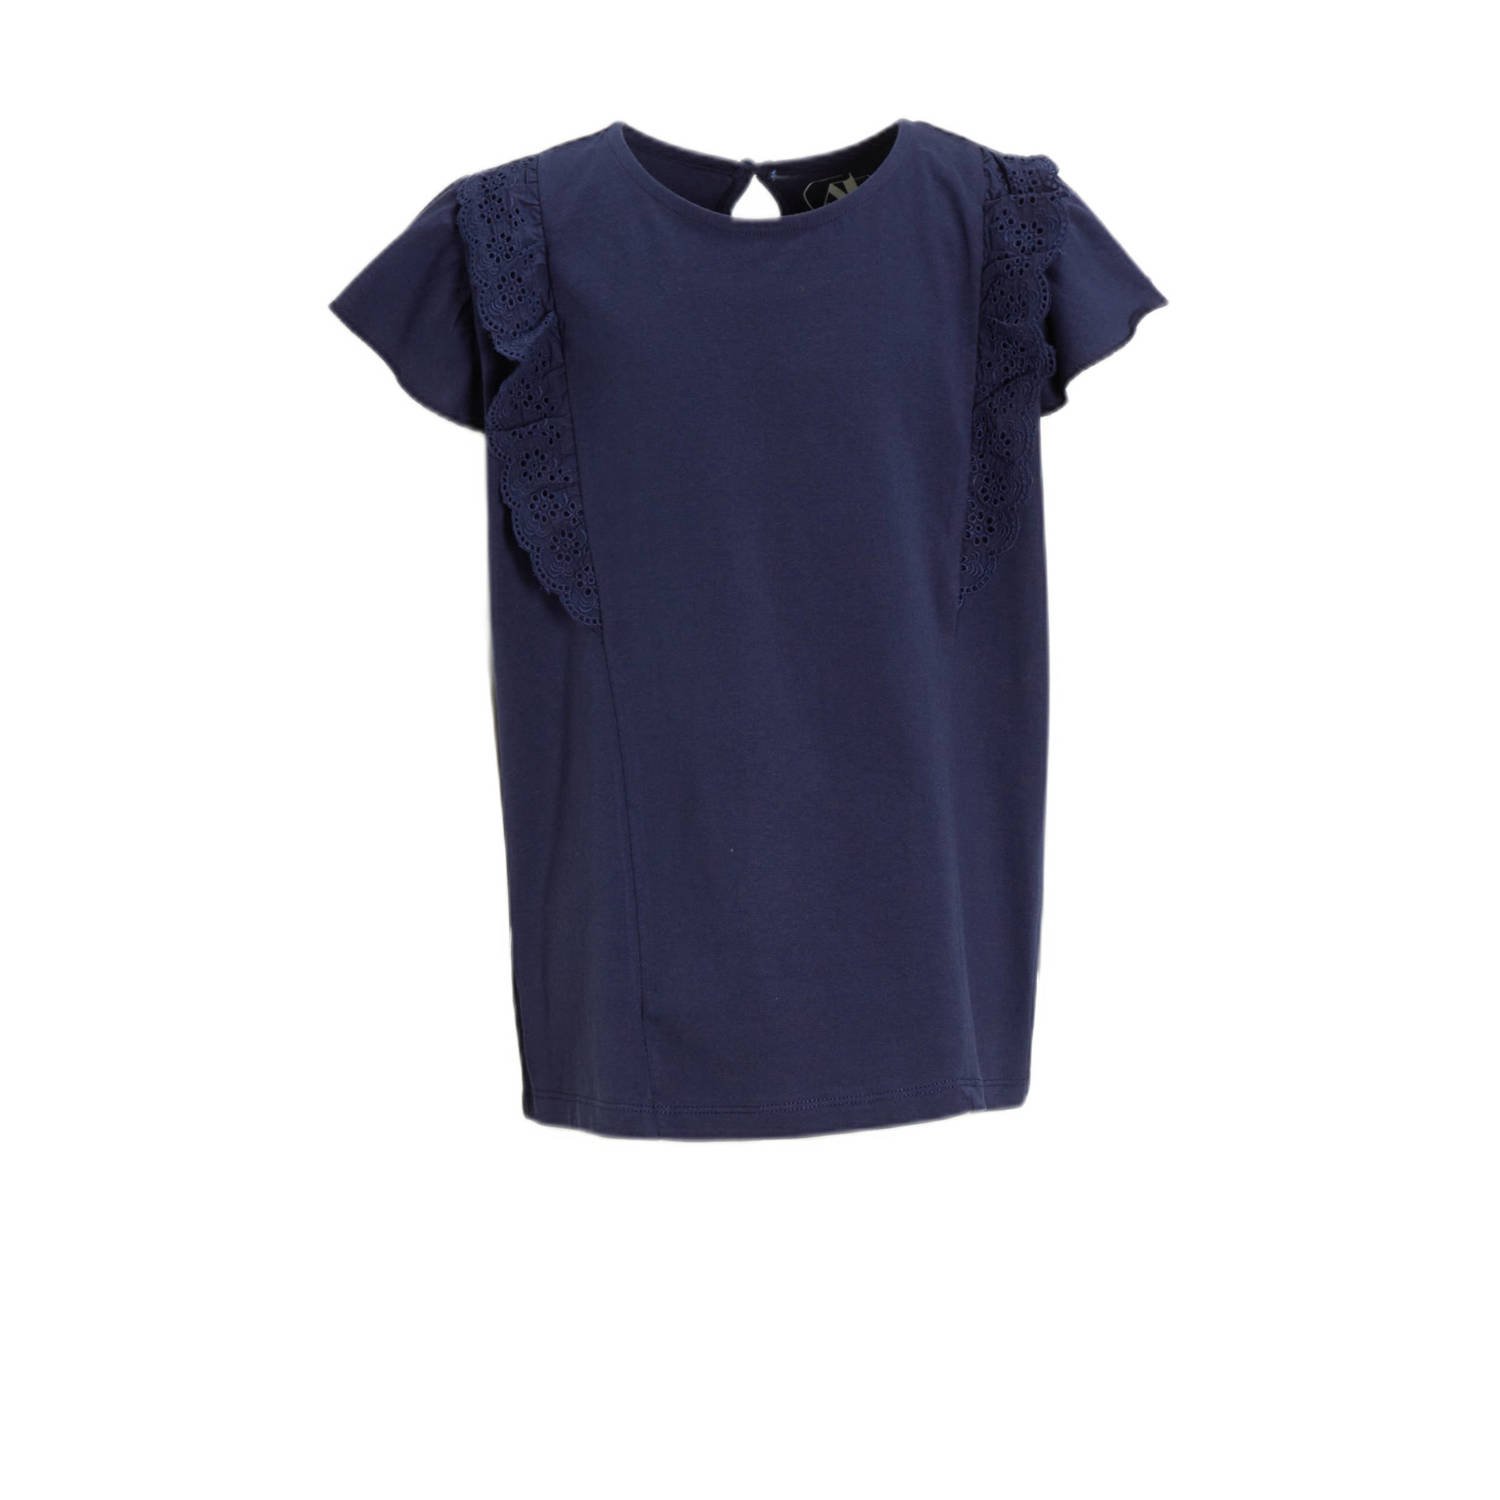 anytime T-shirt met broderie donkerblauw